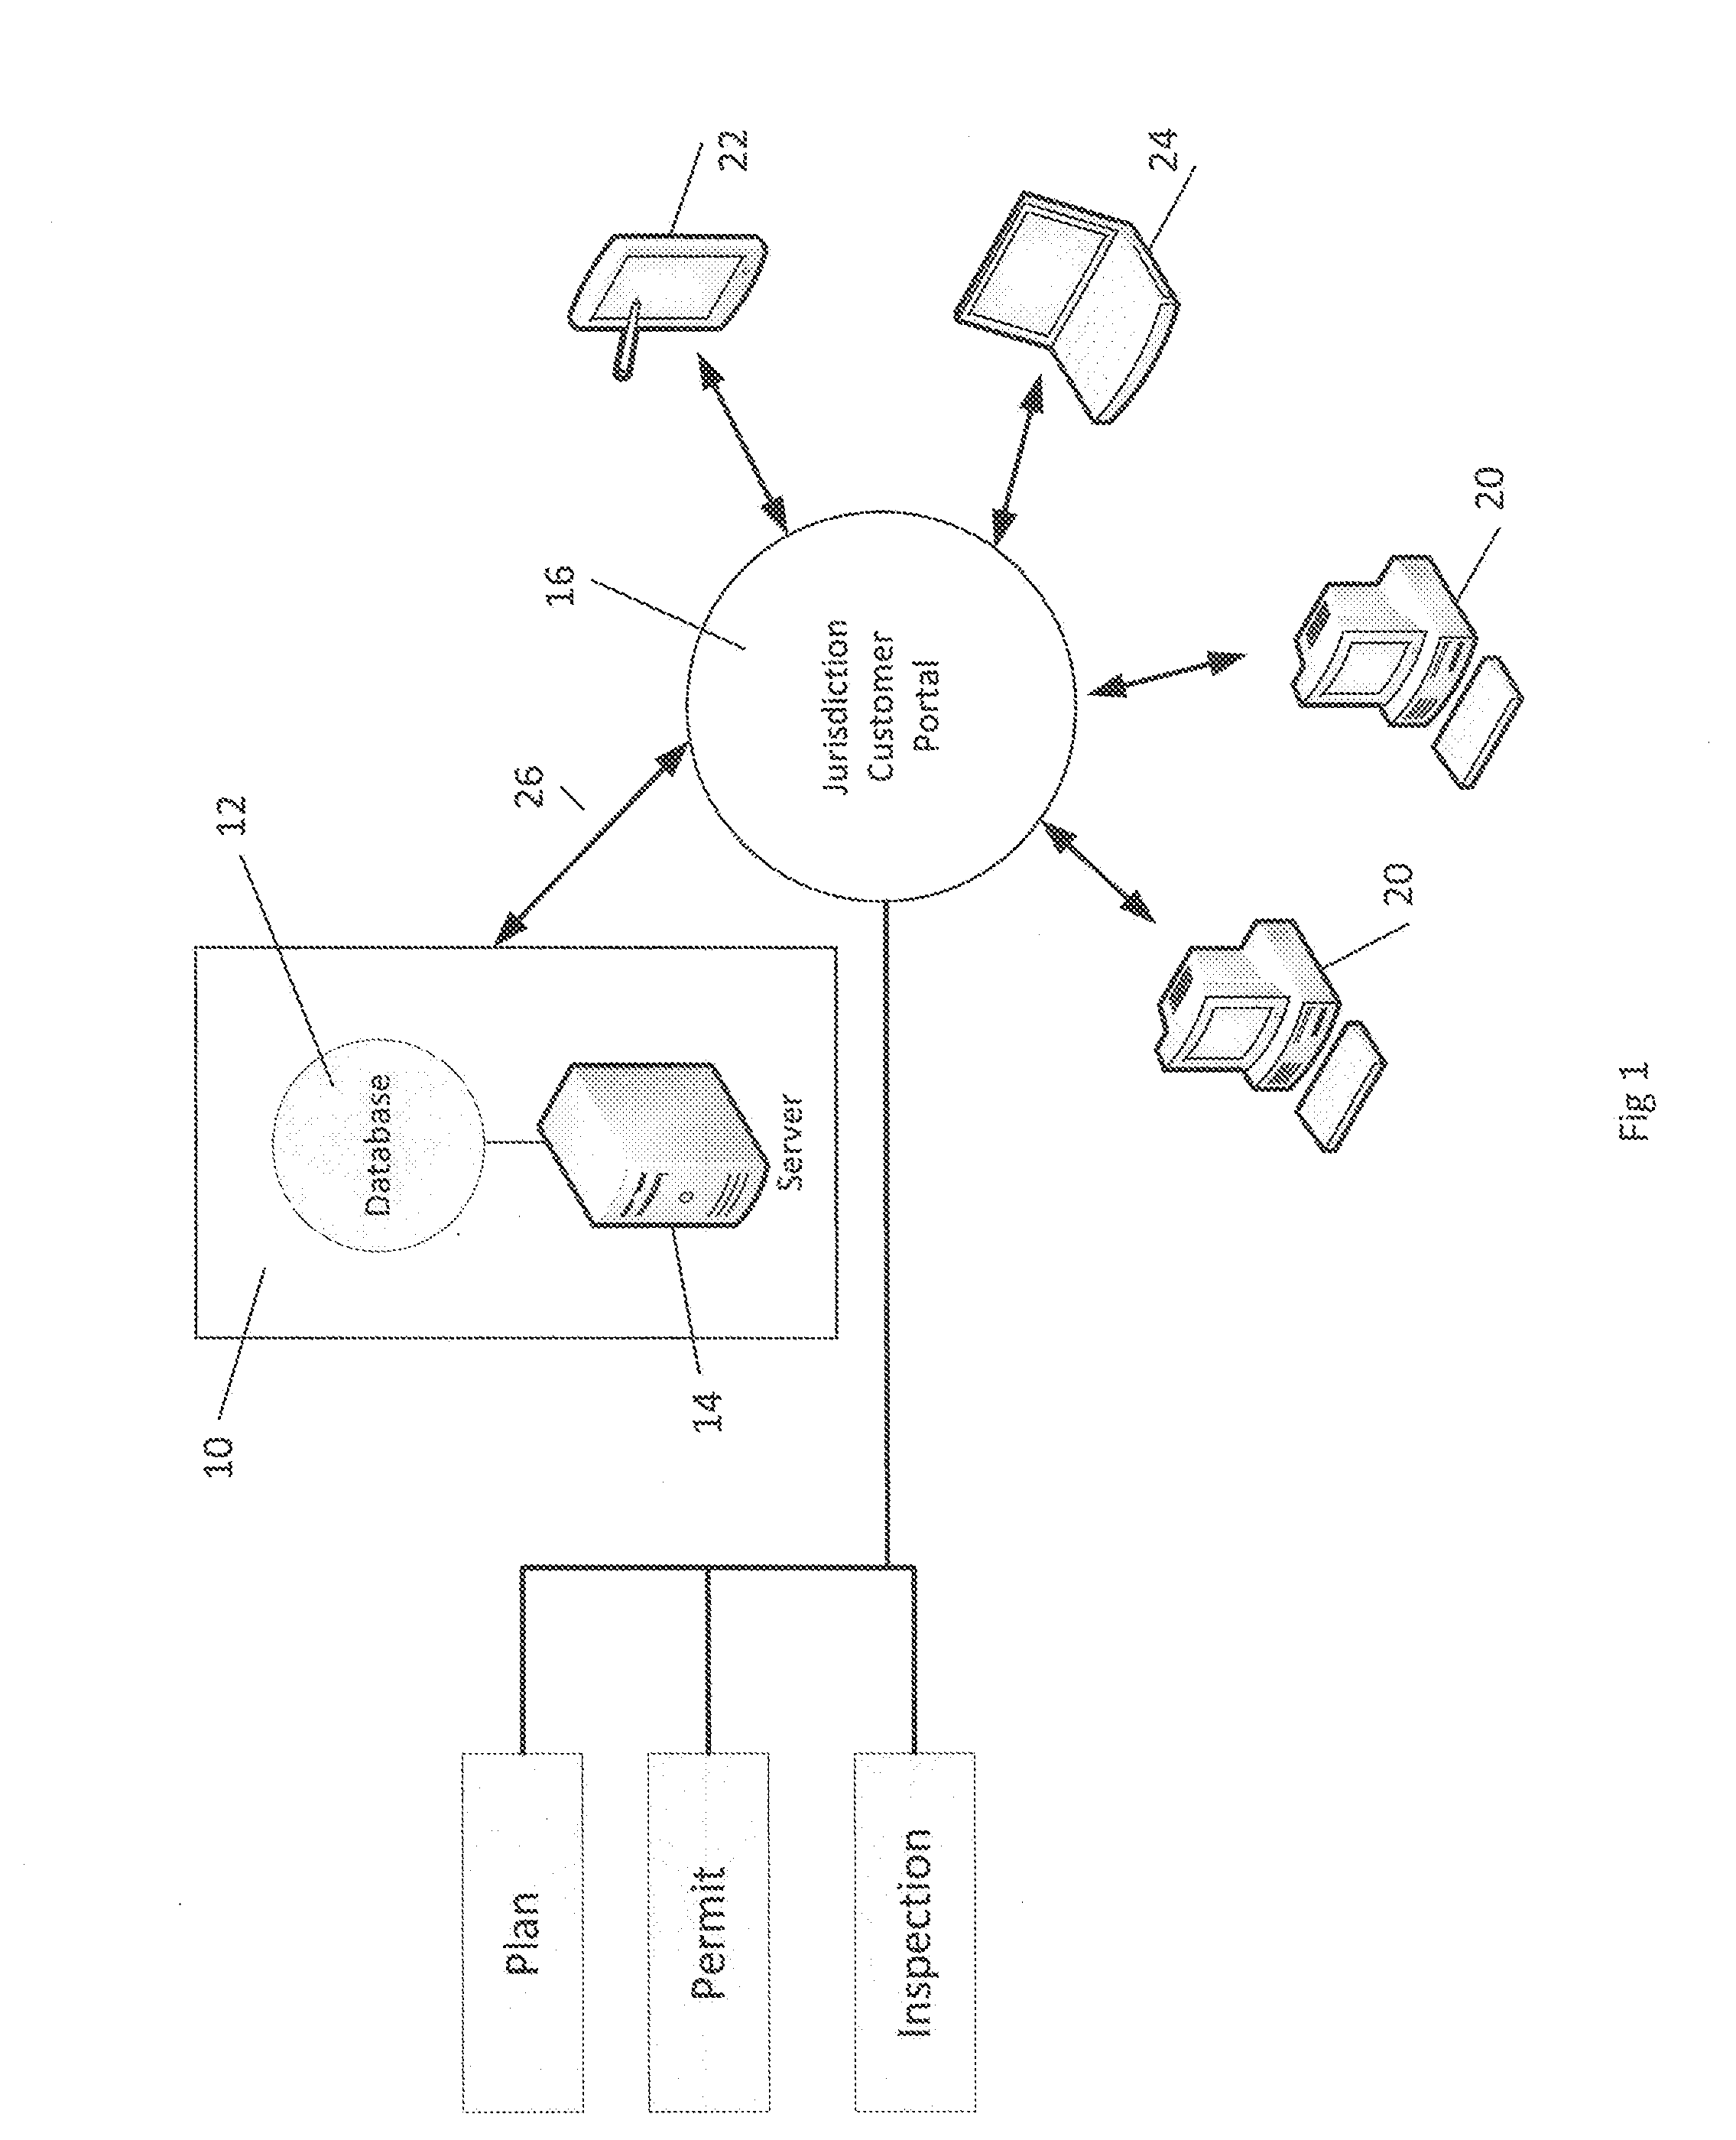 System for monitoring land use activities